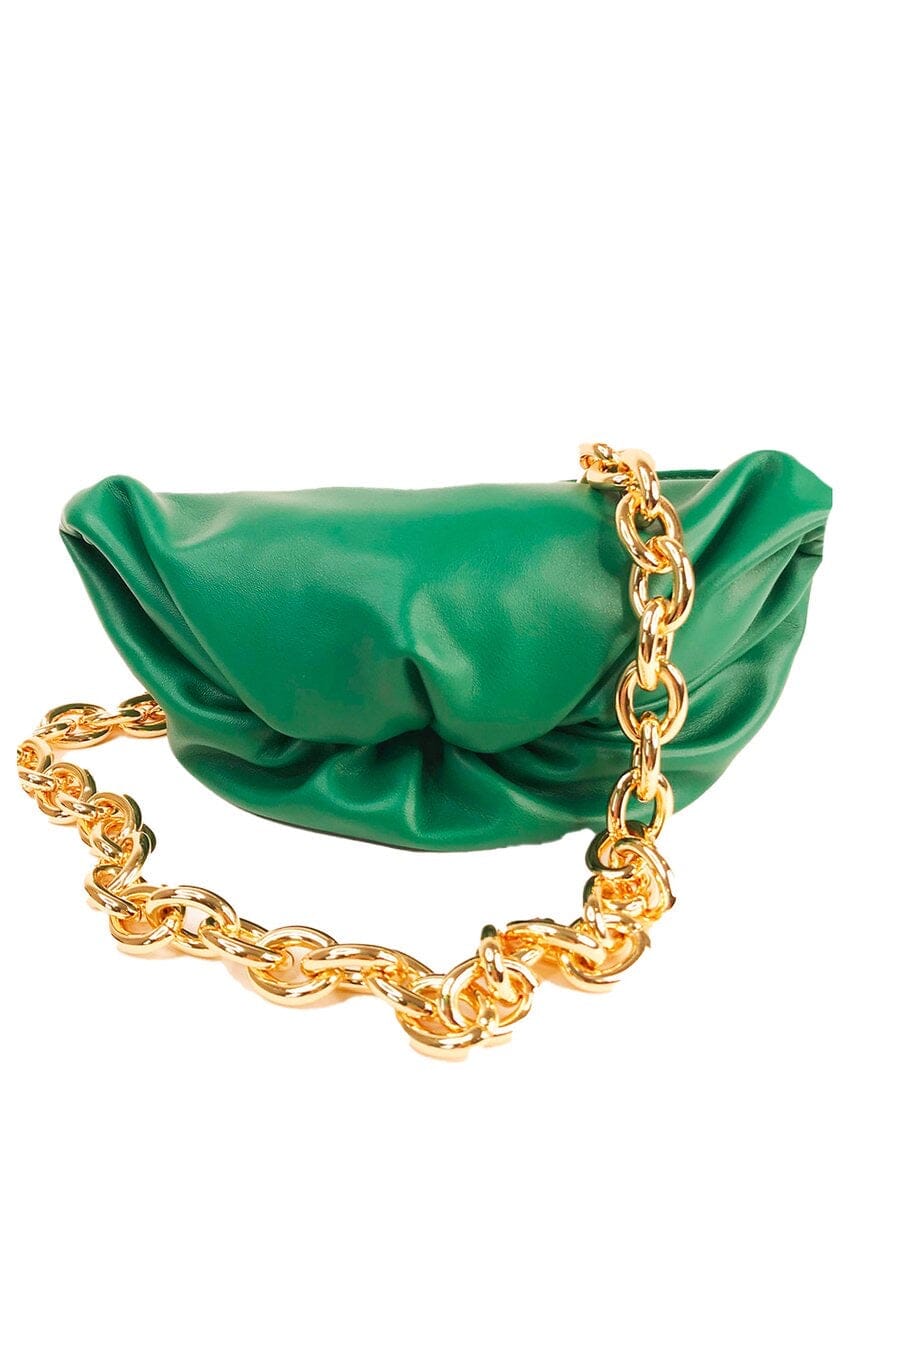 PRINNY LEATHER BAG - KELLY GREEN Jewellery & Accessories Jayley 